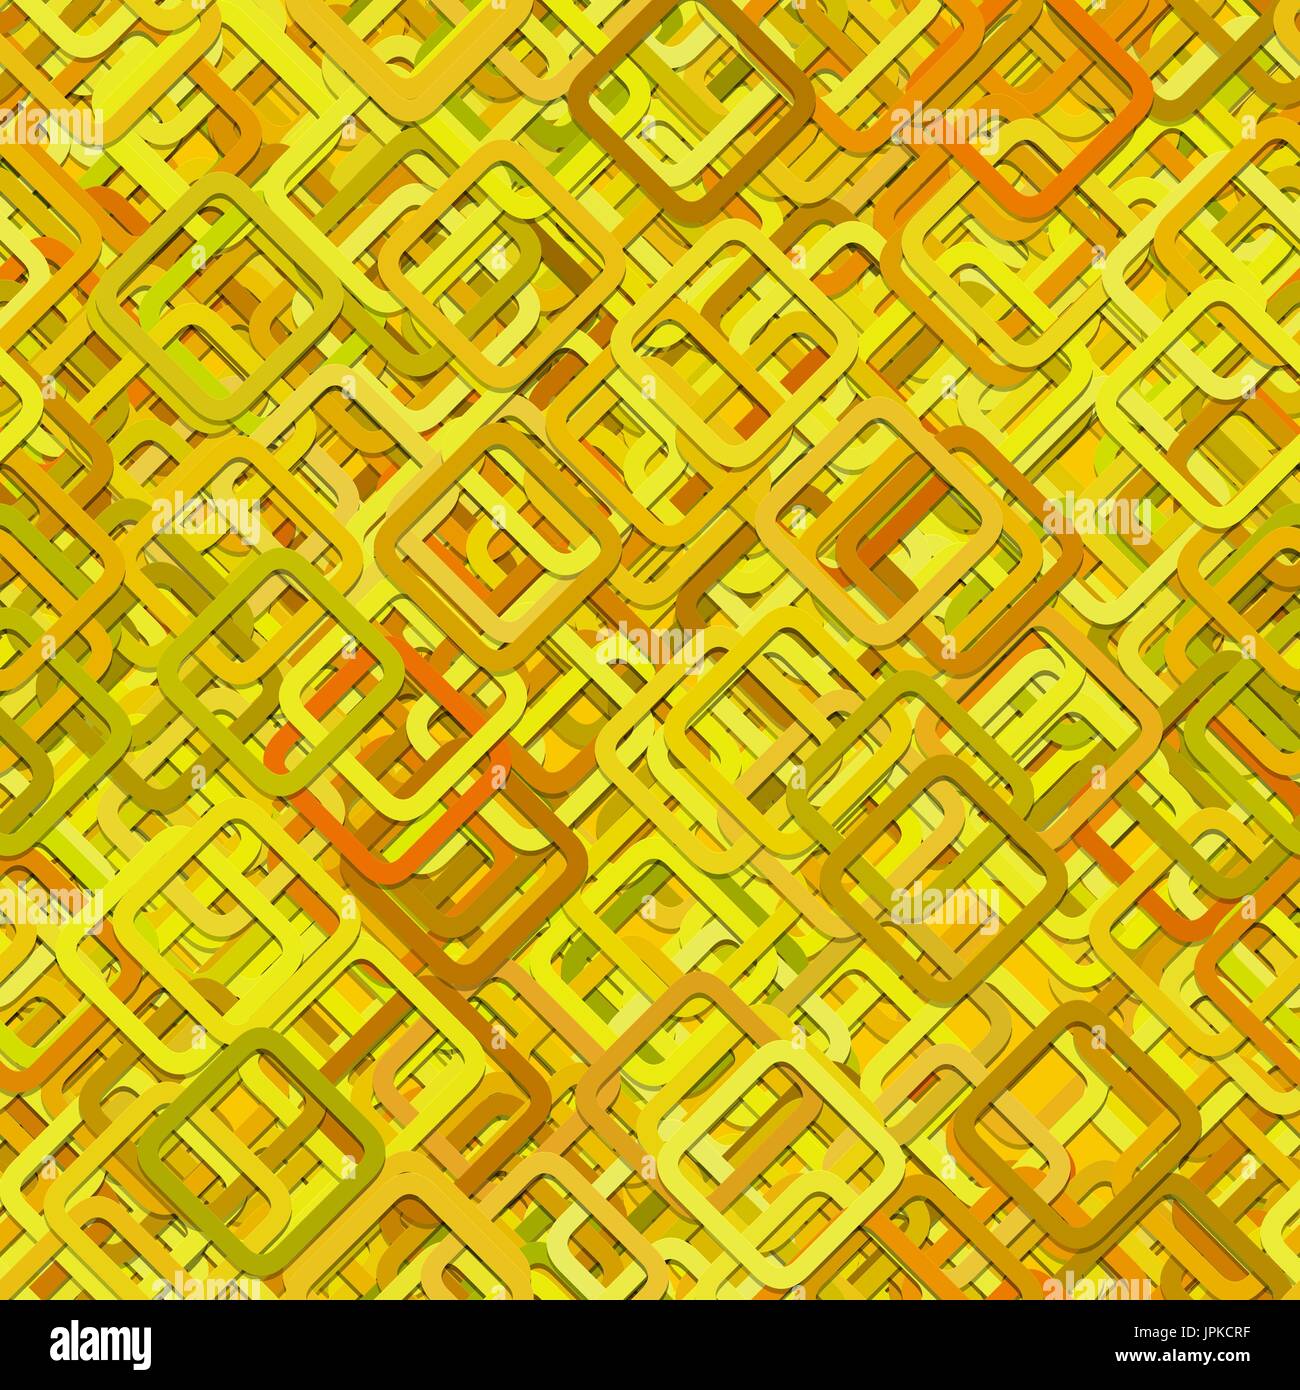 Seamless square background pattern - vector illustration from diagonal squares in yellow tones with shadow effect Stock Vector